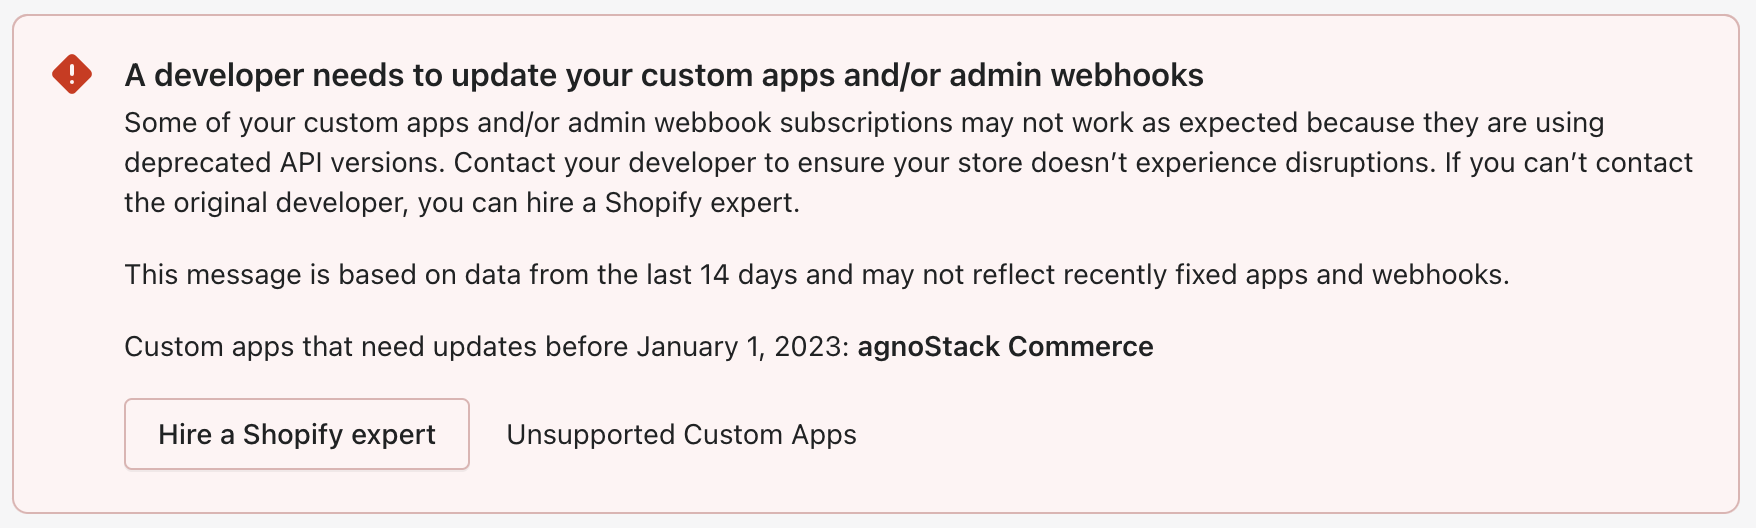 A developer needs to update your custom apps and/or admin webhooks